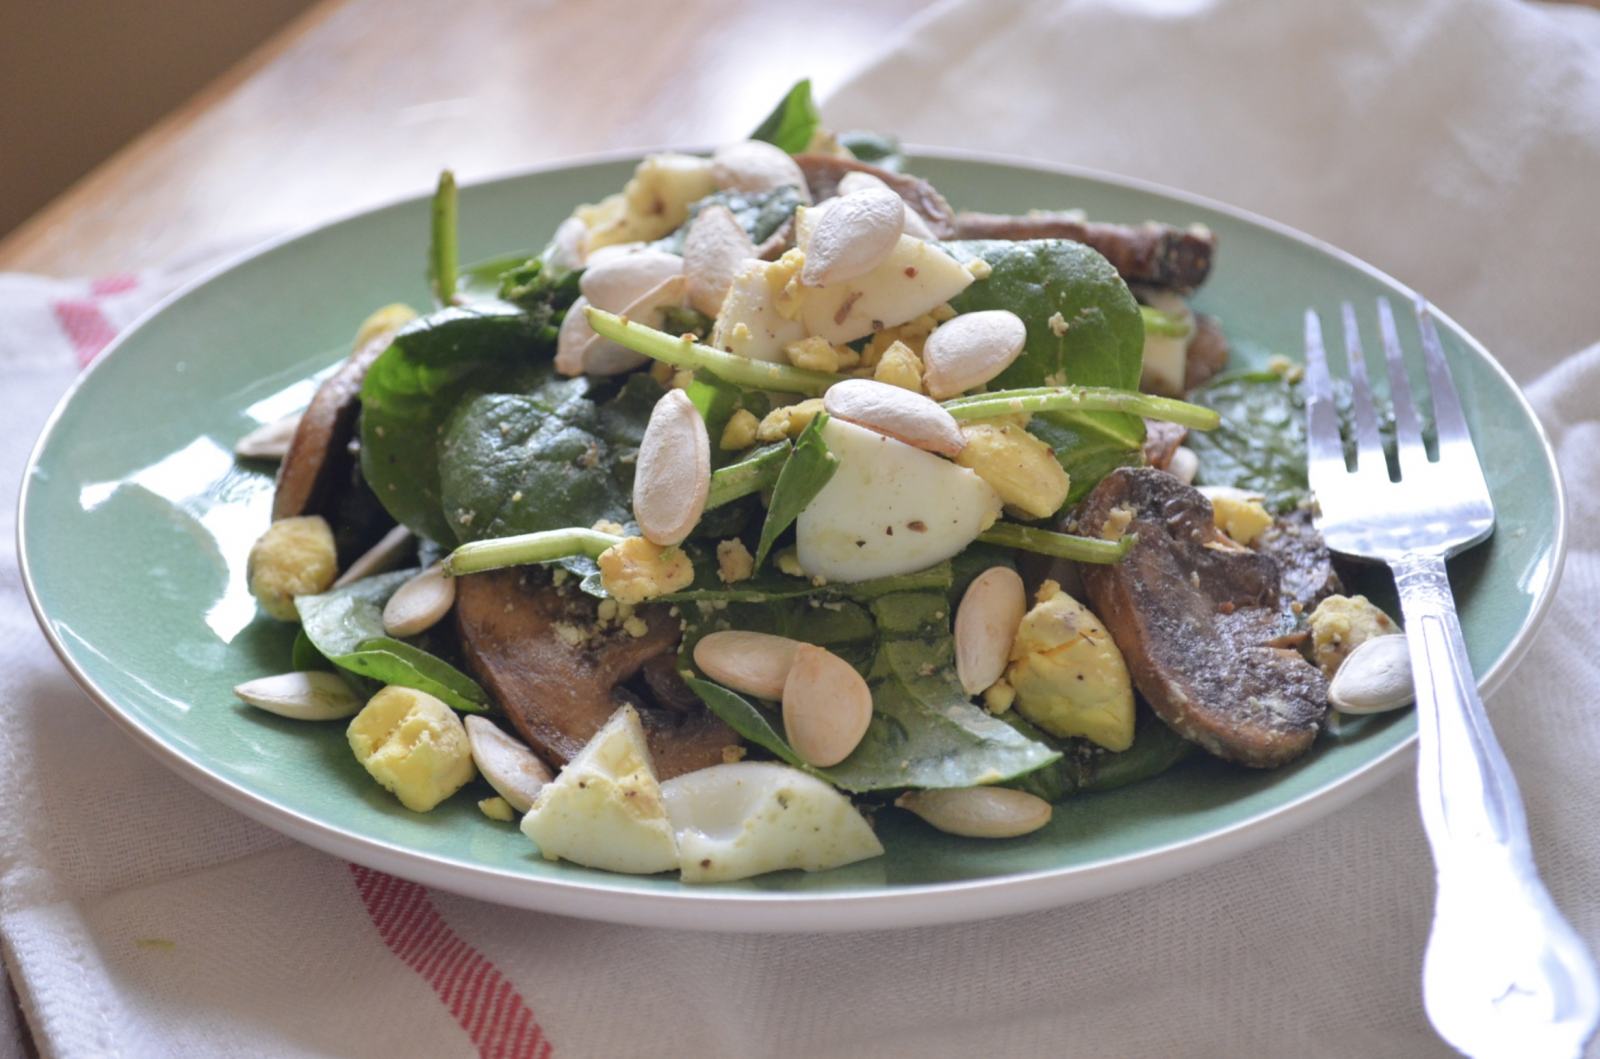 Spinach Salad Recipe With Boiled Eggs And Mushrooms